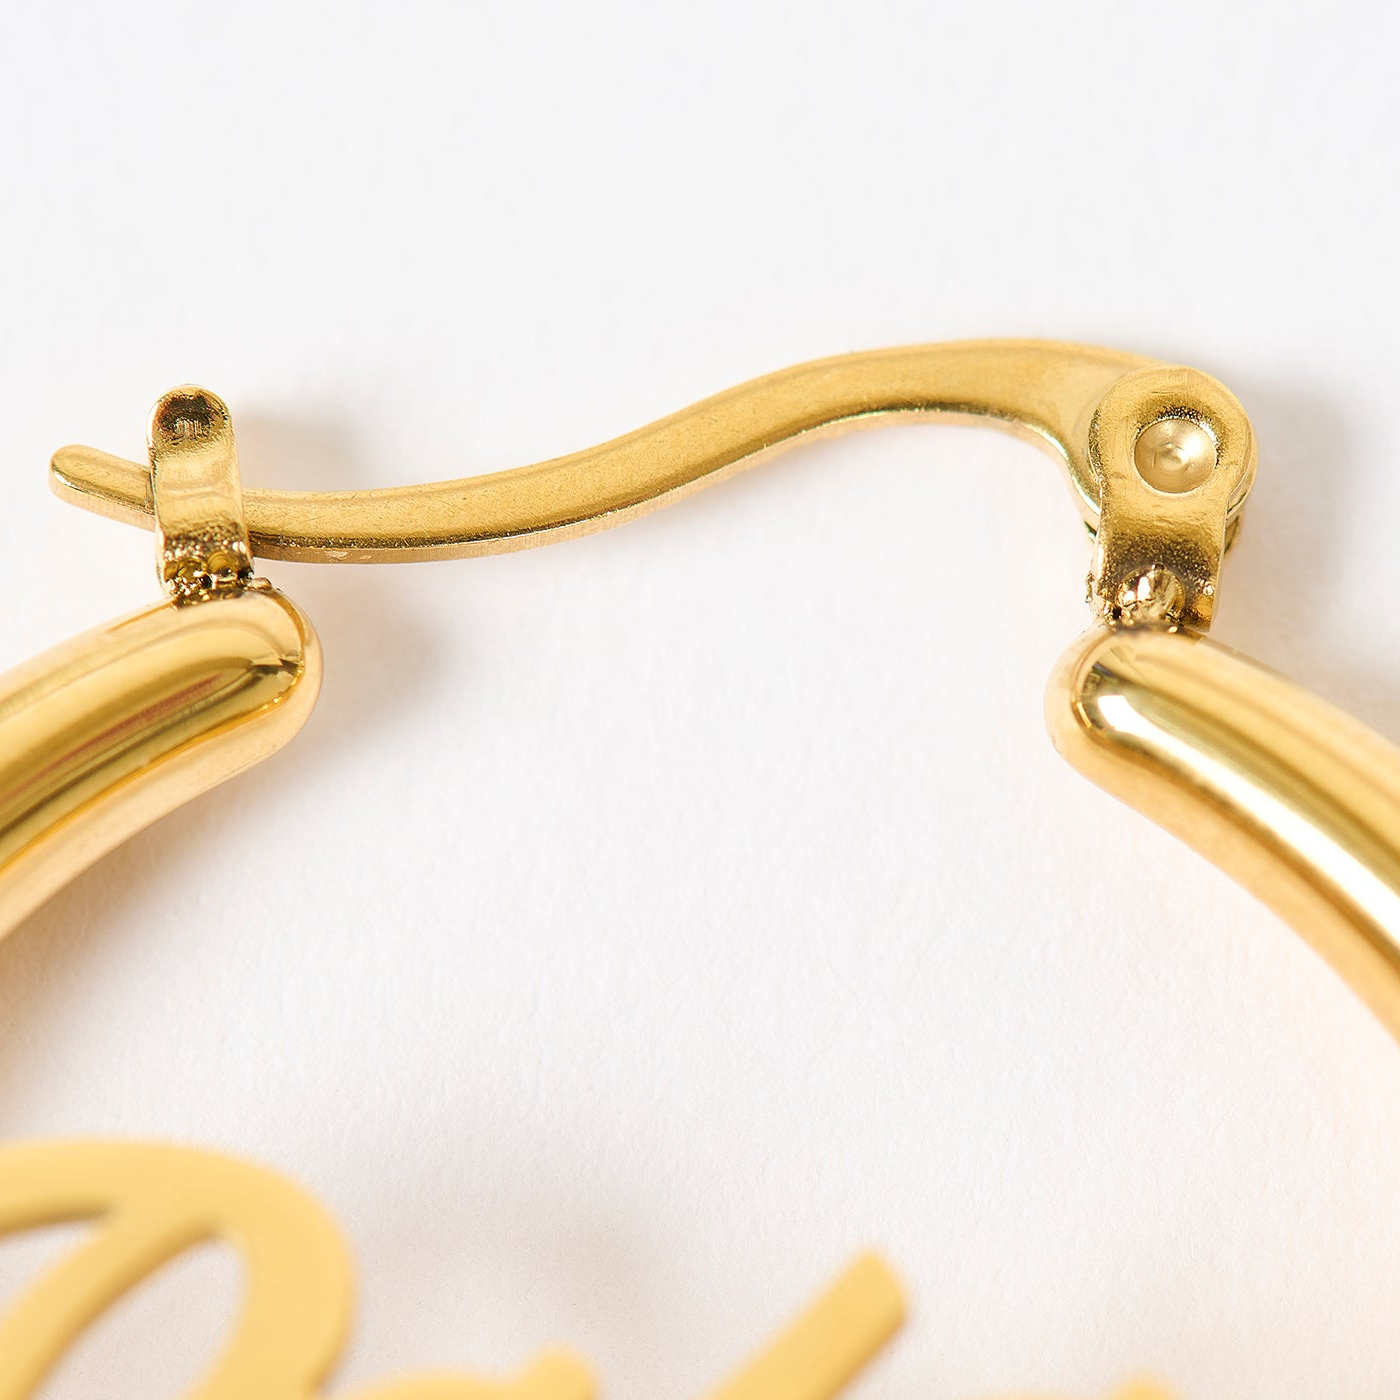 Thumbnail PALACE HOOP EARRINGS GOLD PLATED one color